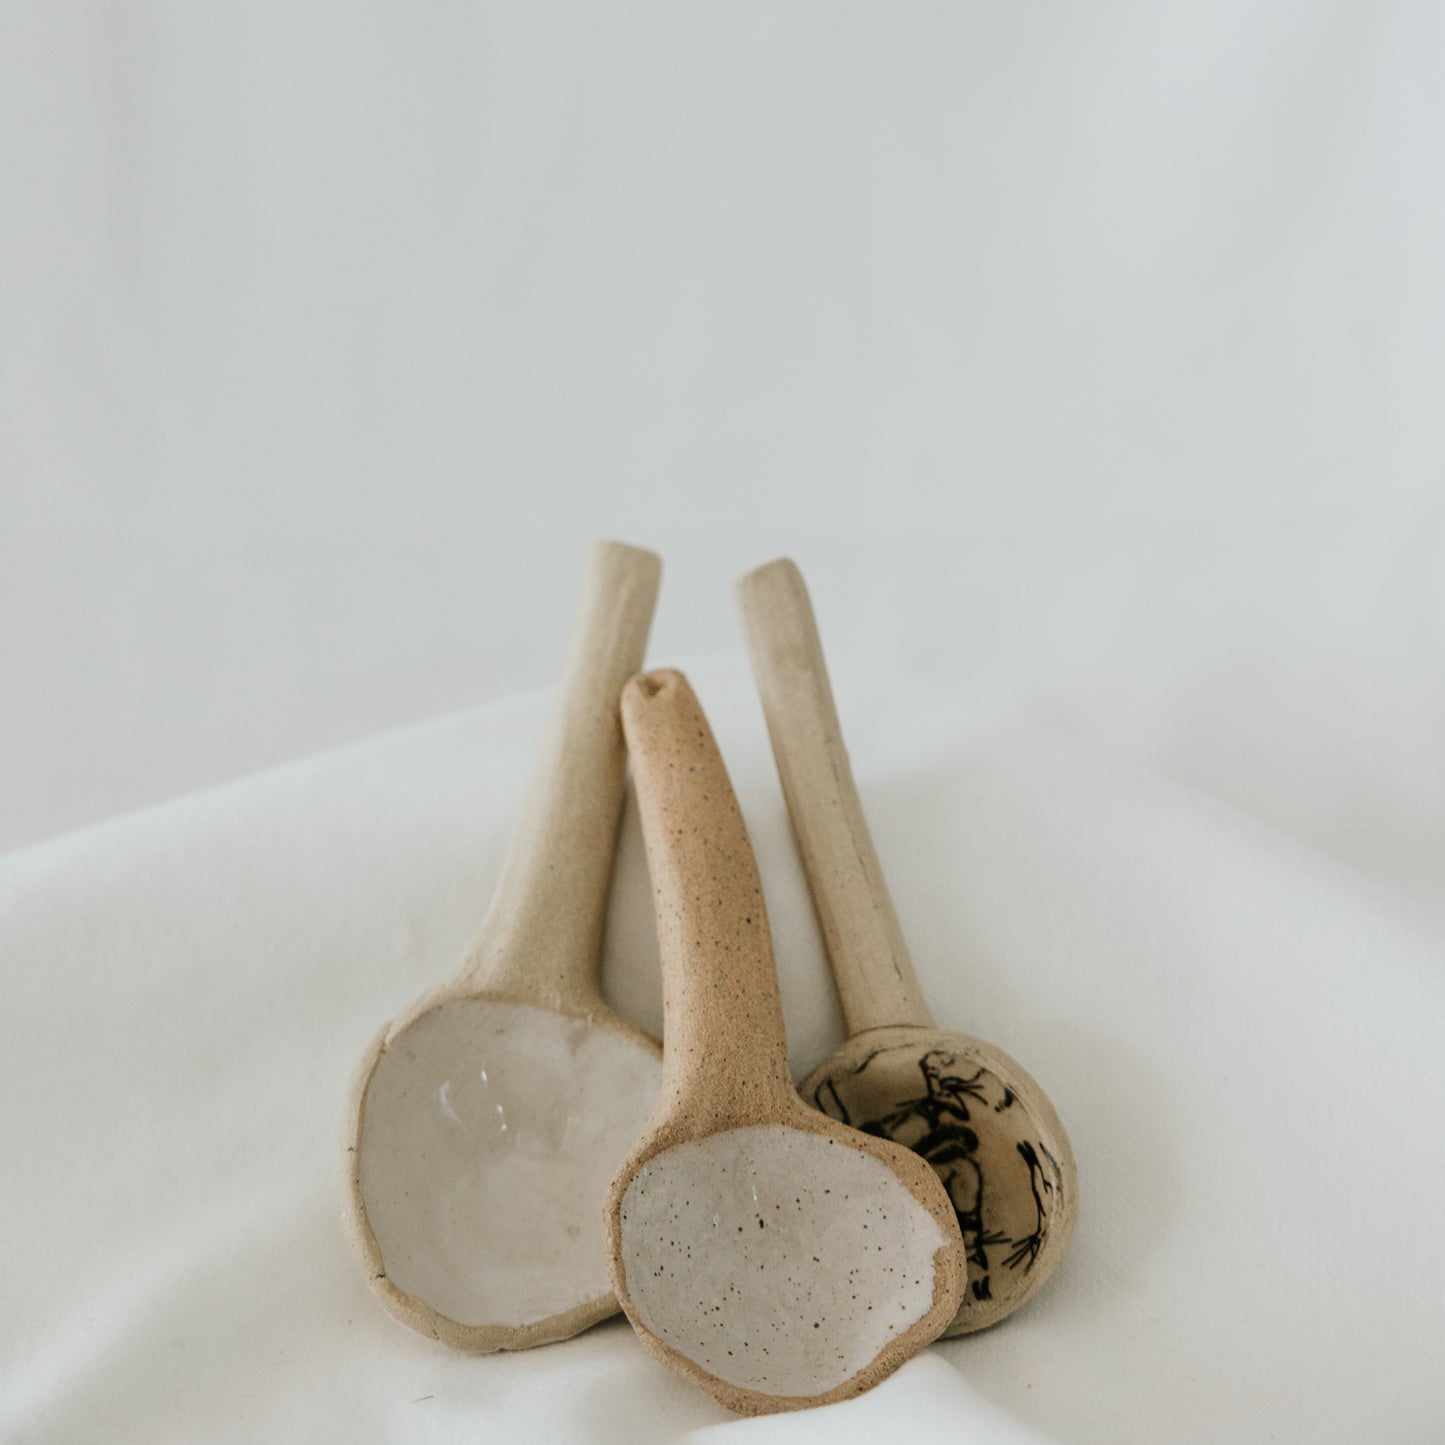 Organic Pottery Spoon in a Variety of Clay and Glazes